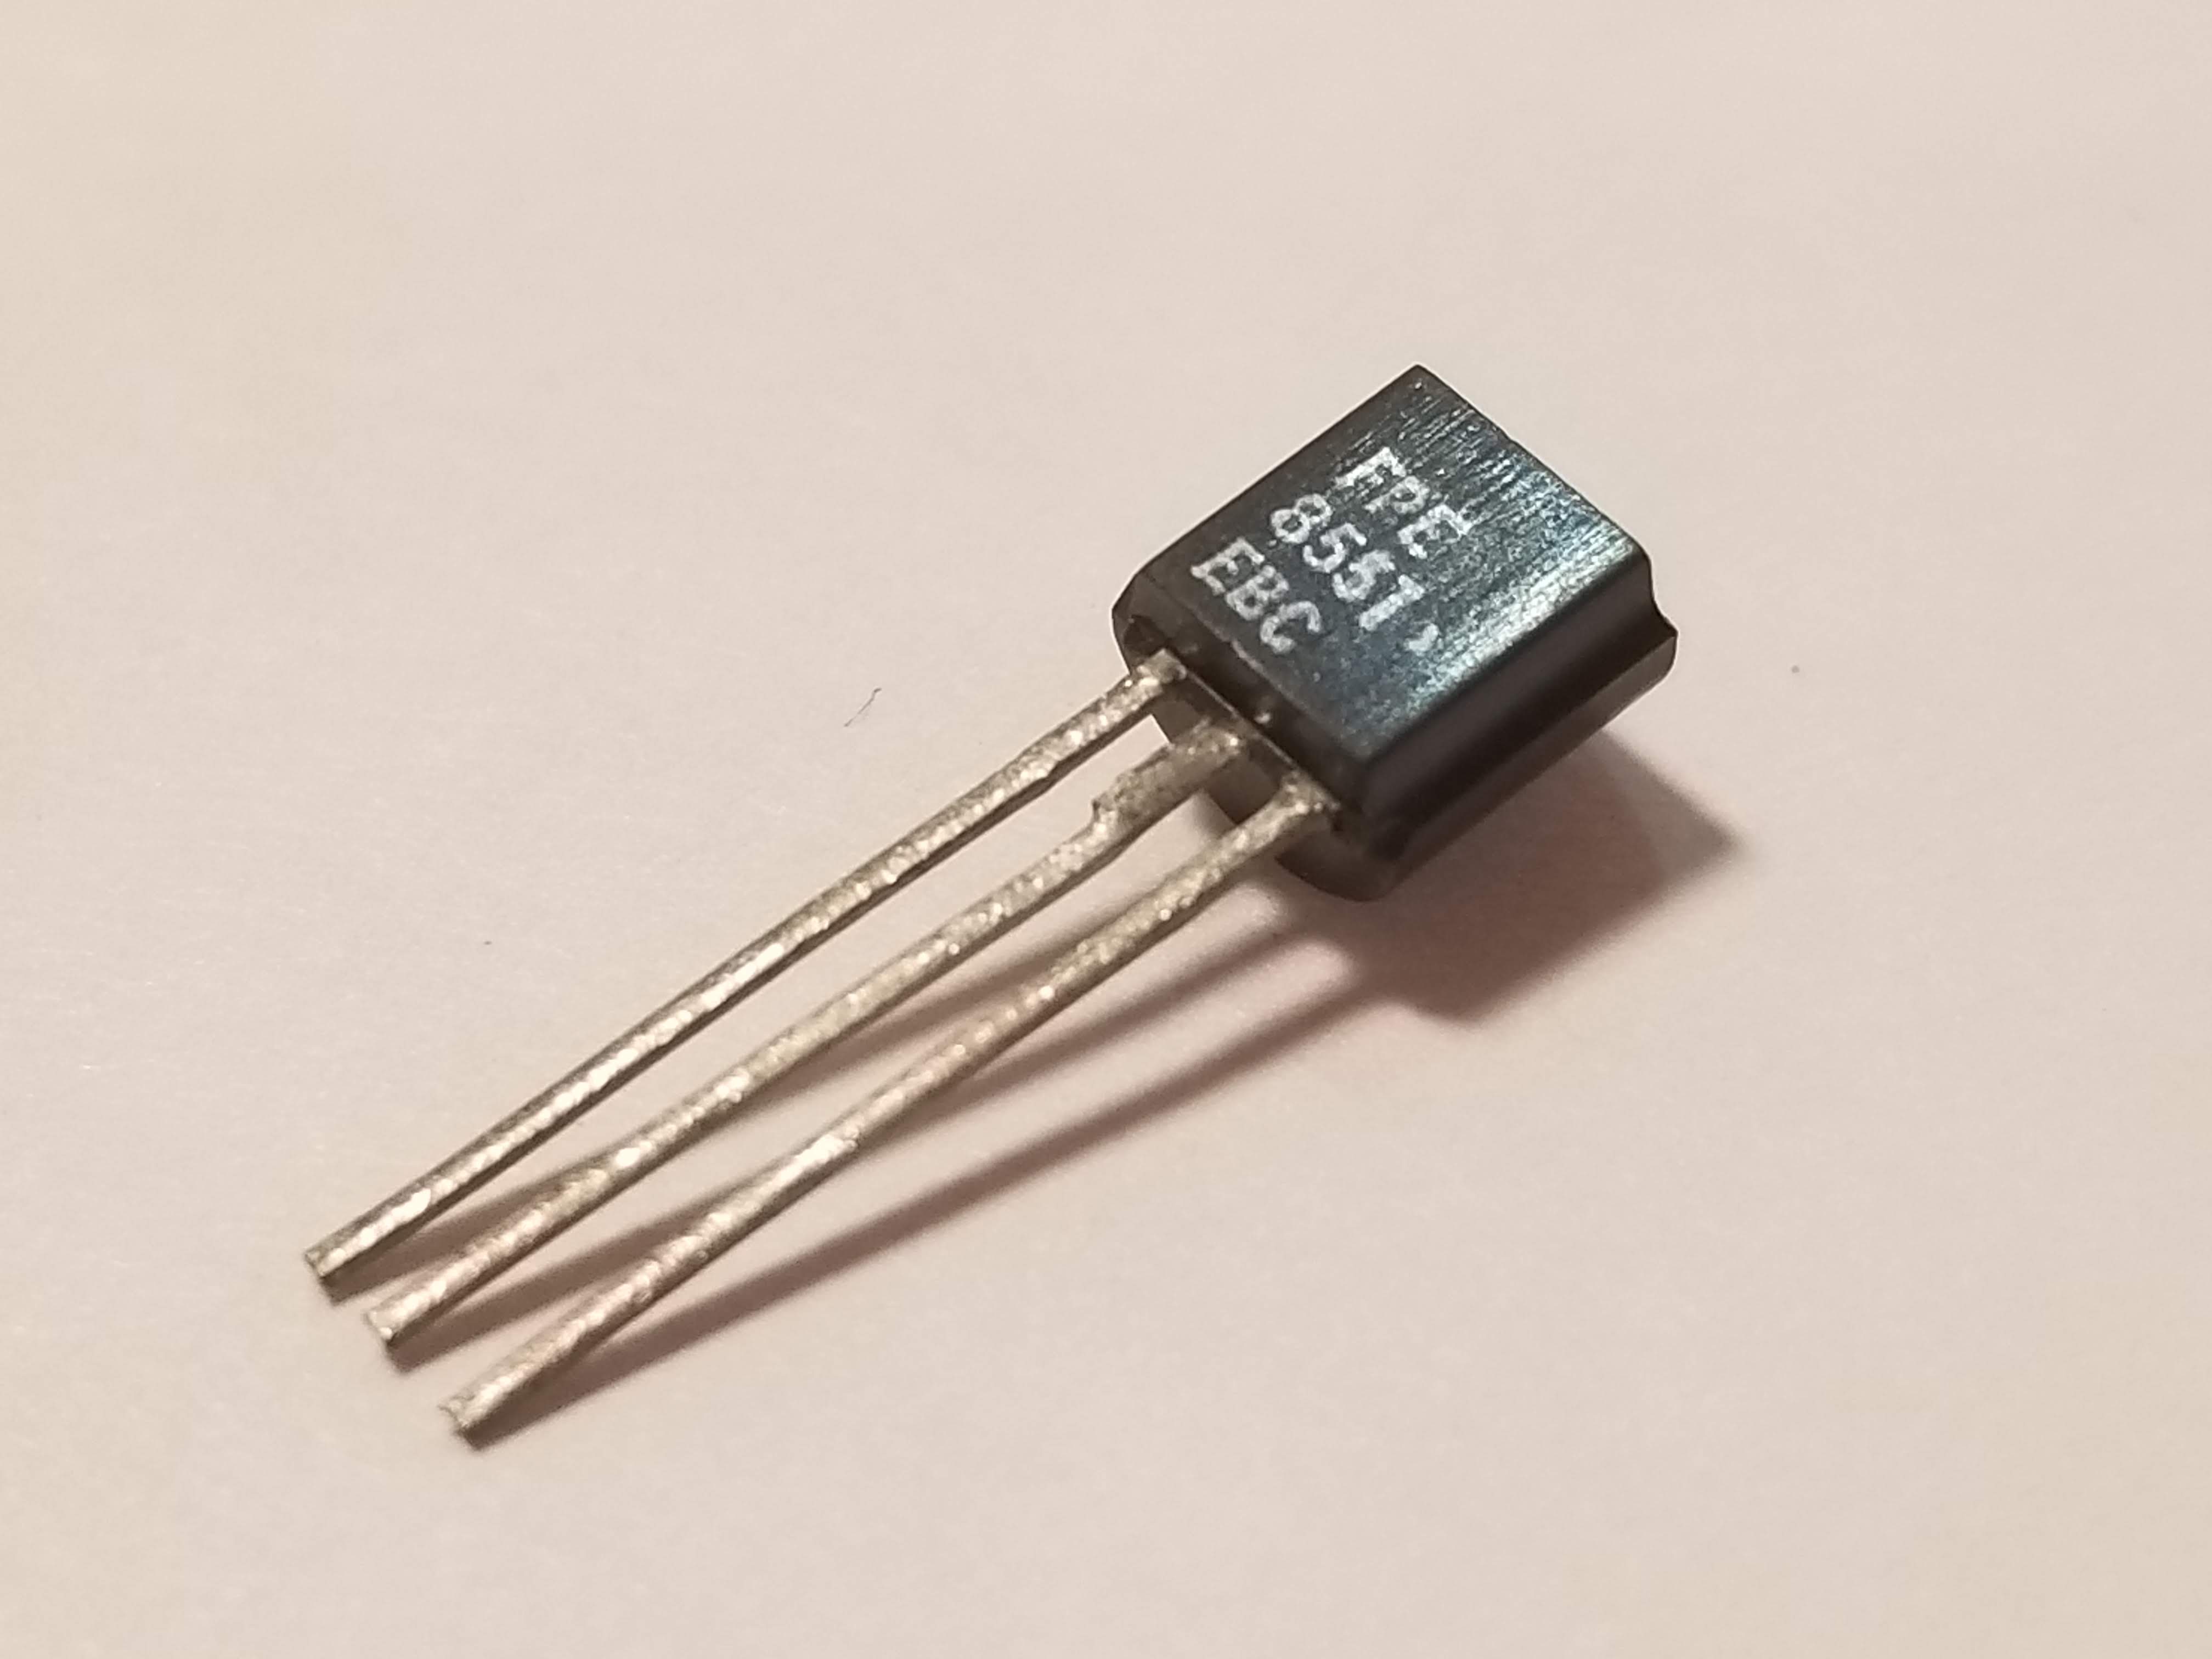 Picture of FPE8551 PNP, 25V, 1.5A, 100MHz, EBC